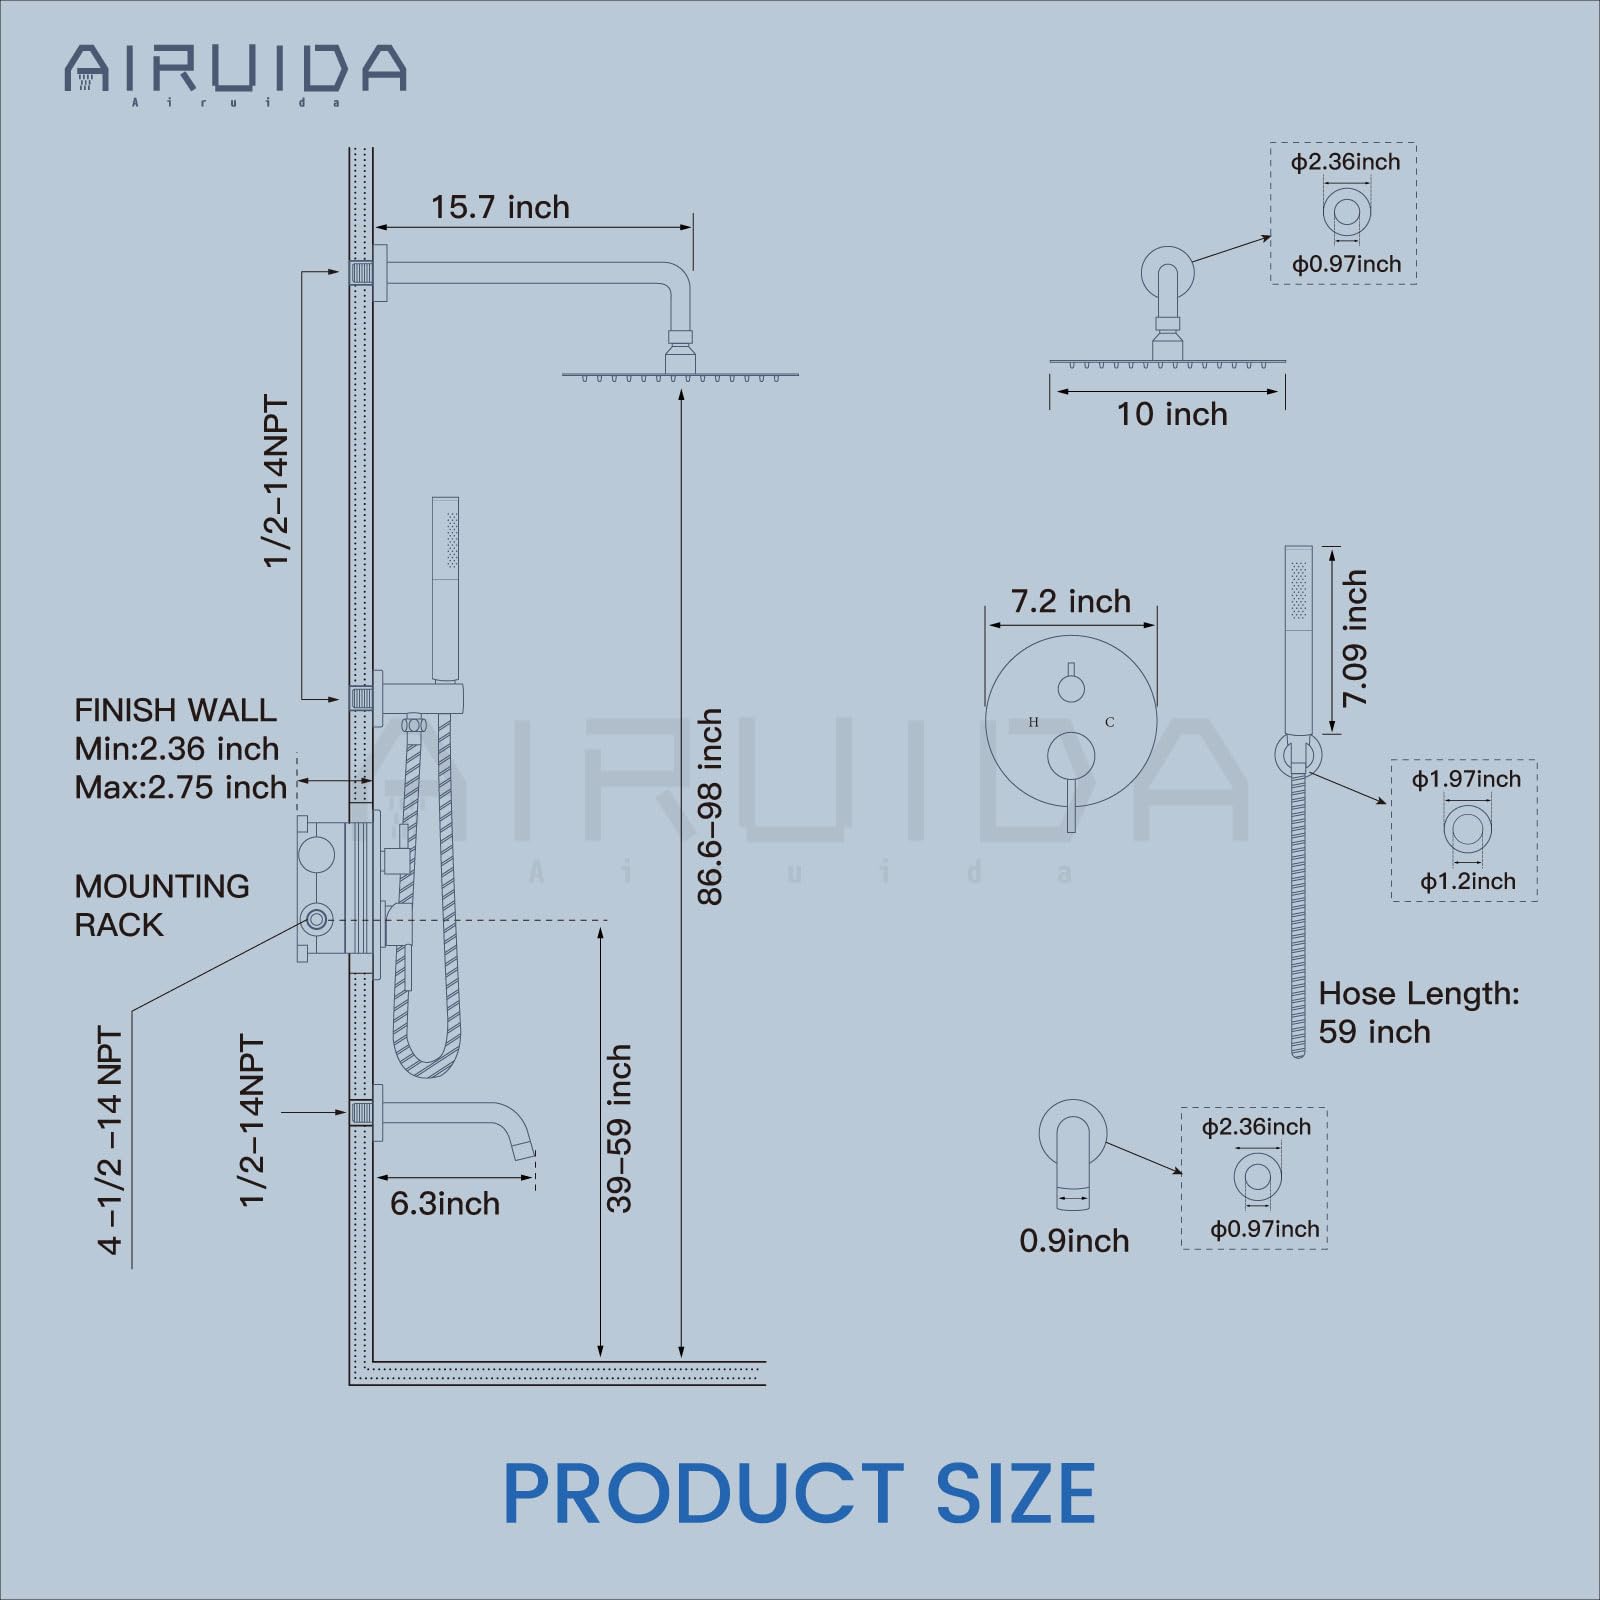 Airuida Round Shower System Set with Tub Spout, Wall Mount 3 Function Rain Shower Faucet Set, Matte Black 10 Inches Round Shower Head with 2 Functions Handheld Shower